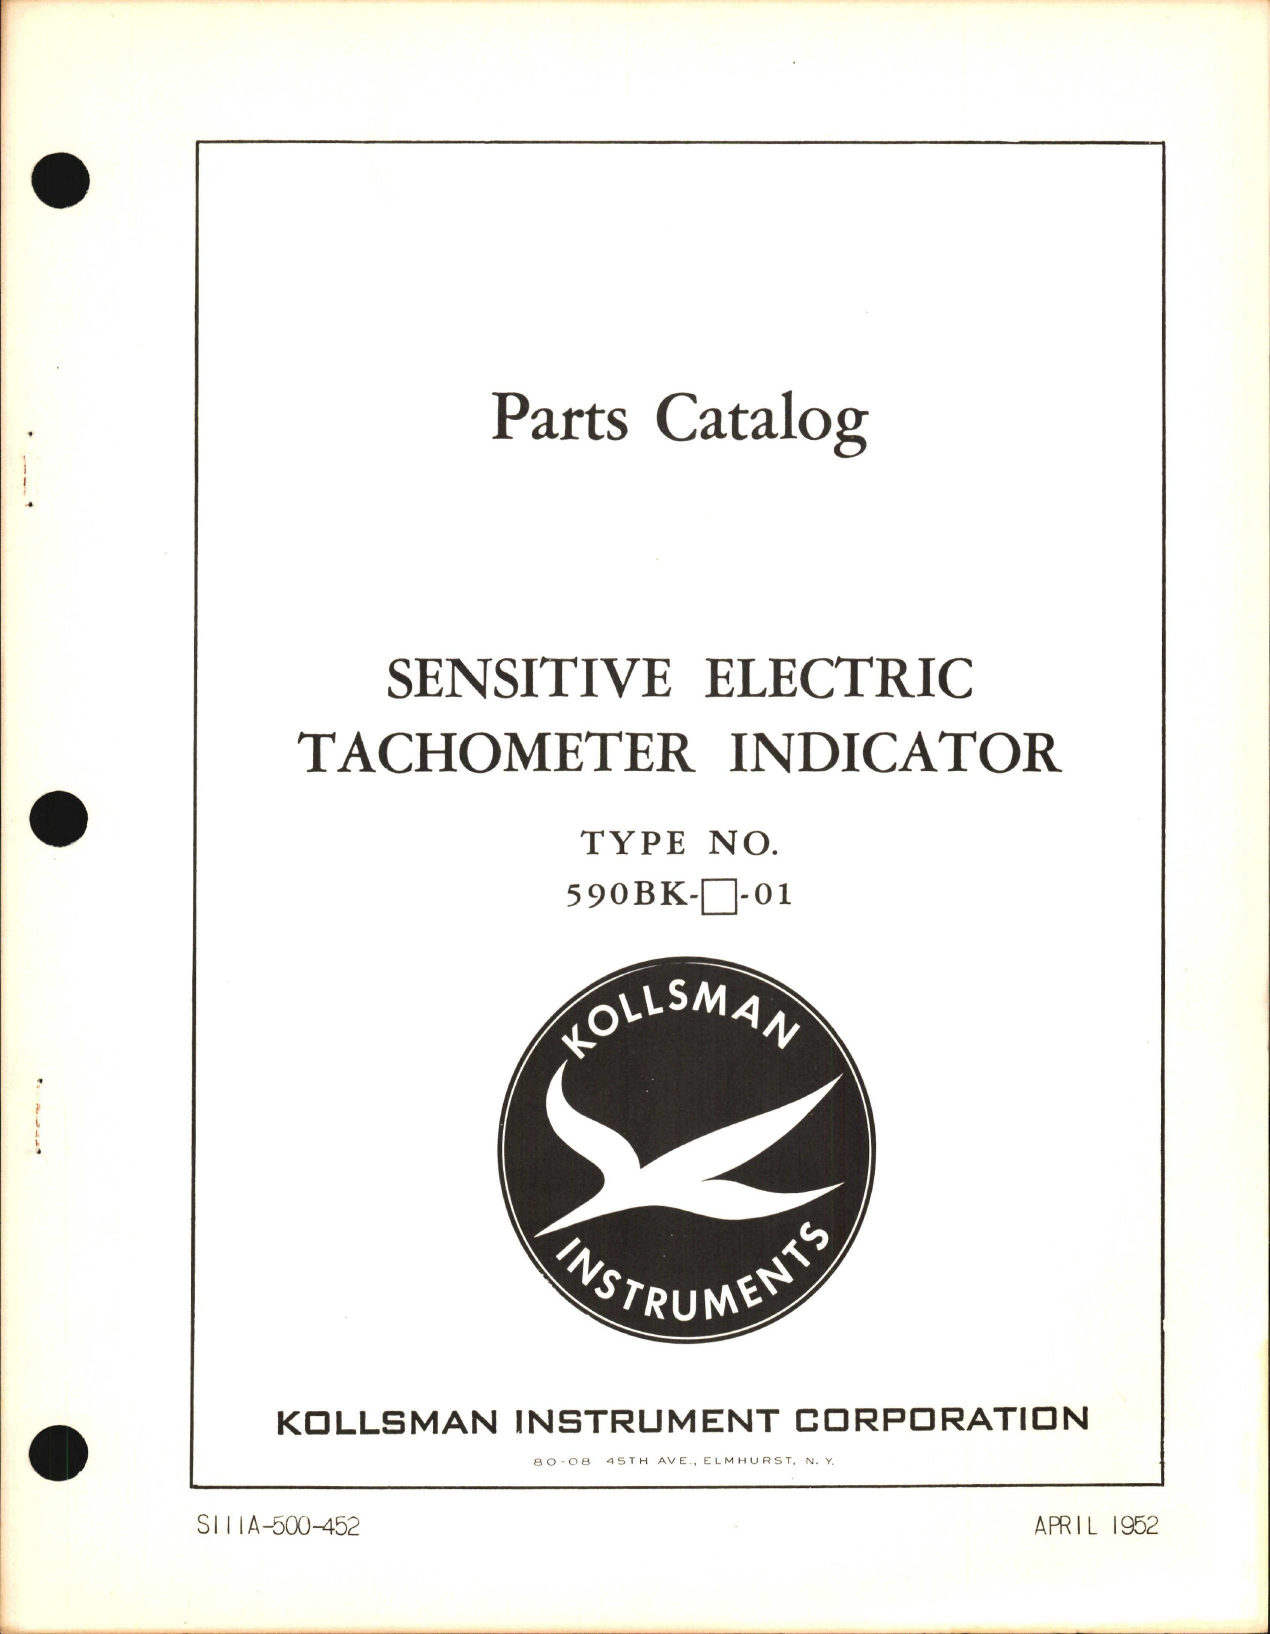 Sample page 1 from AirCorps Library document: Parts Catalog for Kollsman Sensitive Electric Tachometer Indicator 590BK-01